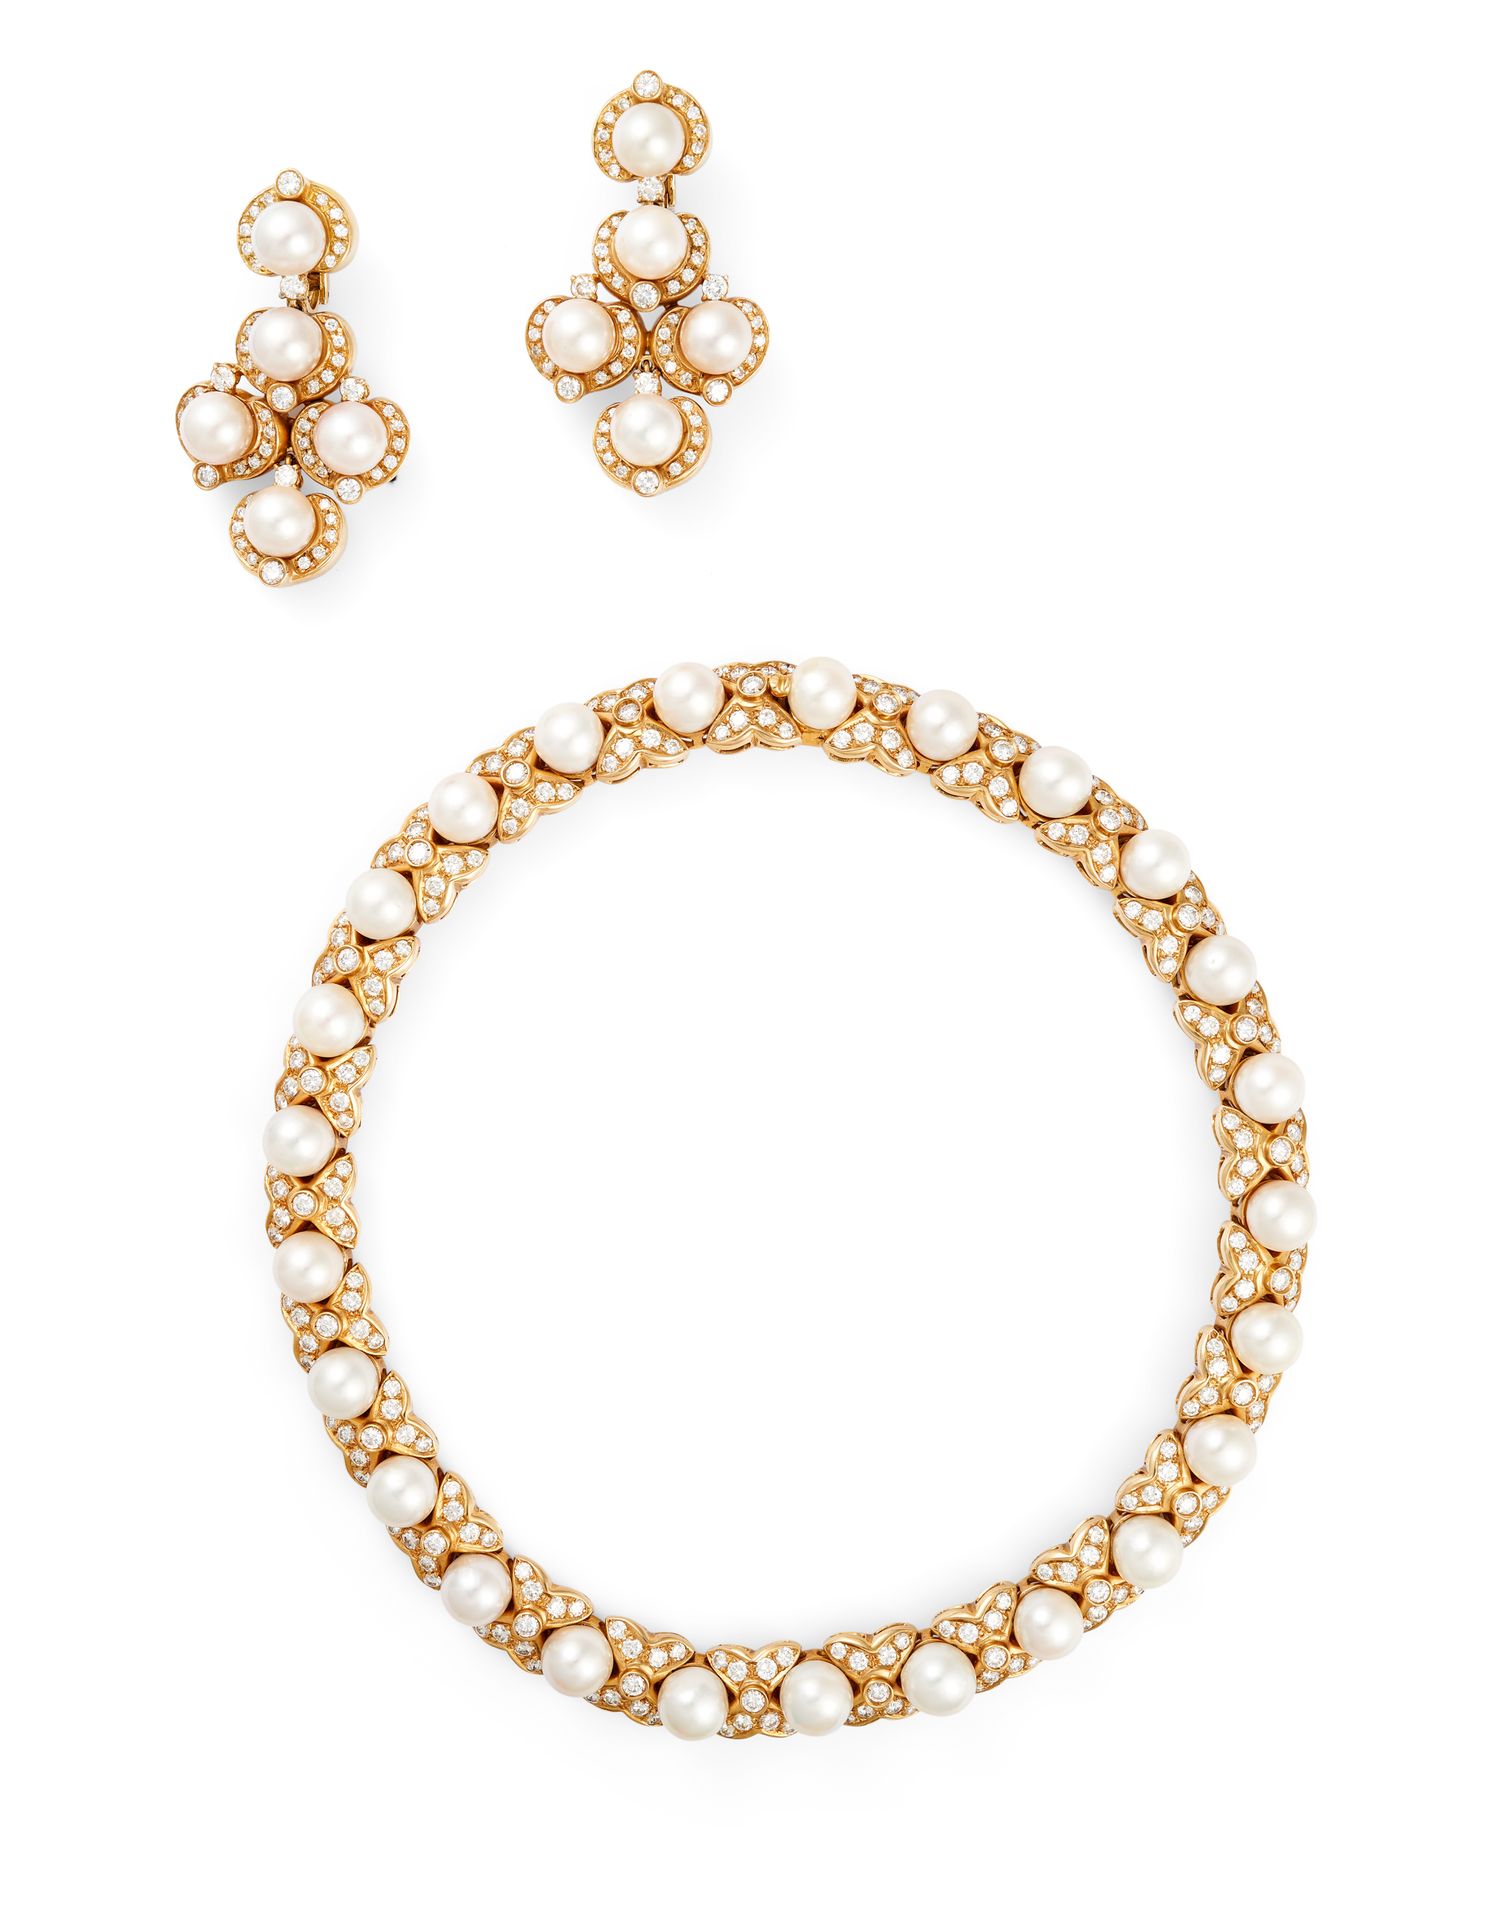 Null DIAMOND AND PEARL DEMI-PARURE In 18K yellow gold, comprising a necklace and&hellip;